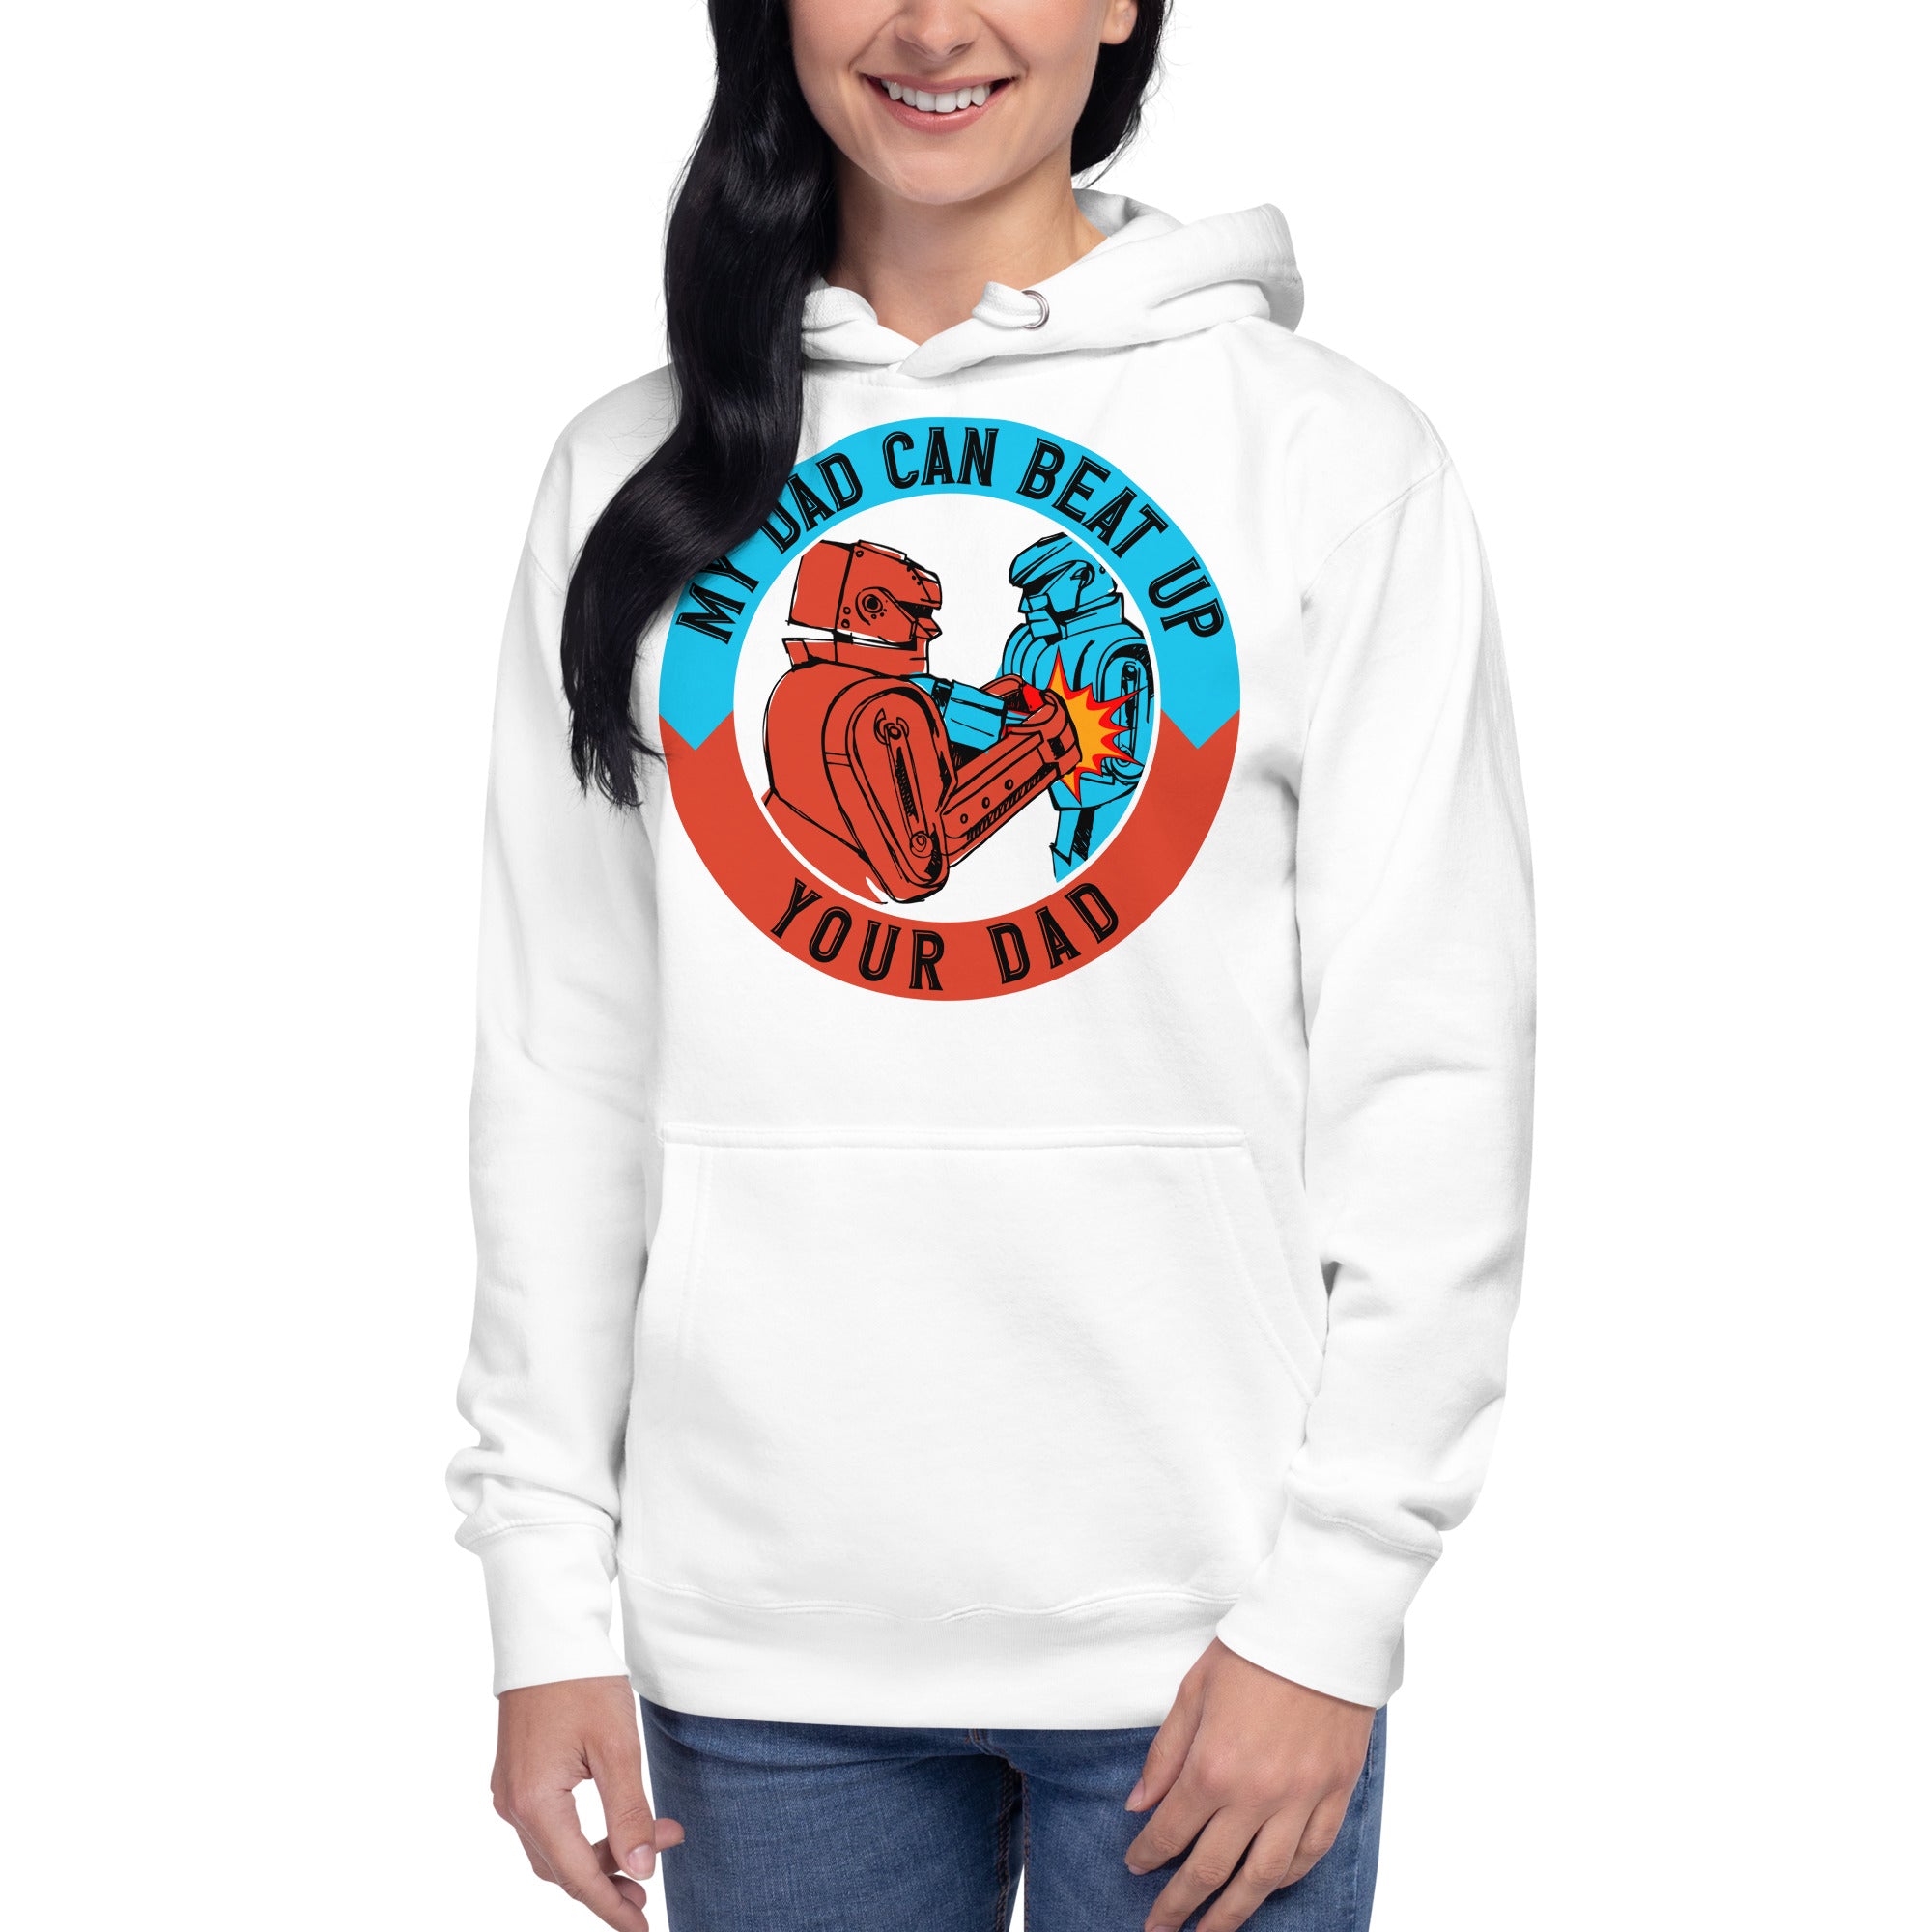 My Dad Can Beat Up Your Dad Women's Heavy Hoodie